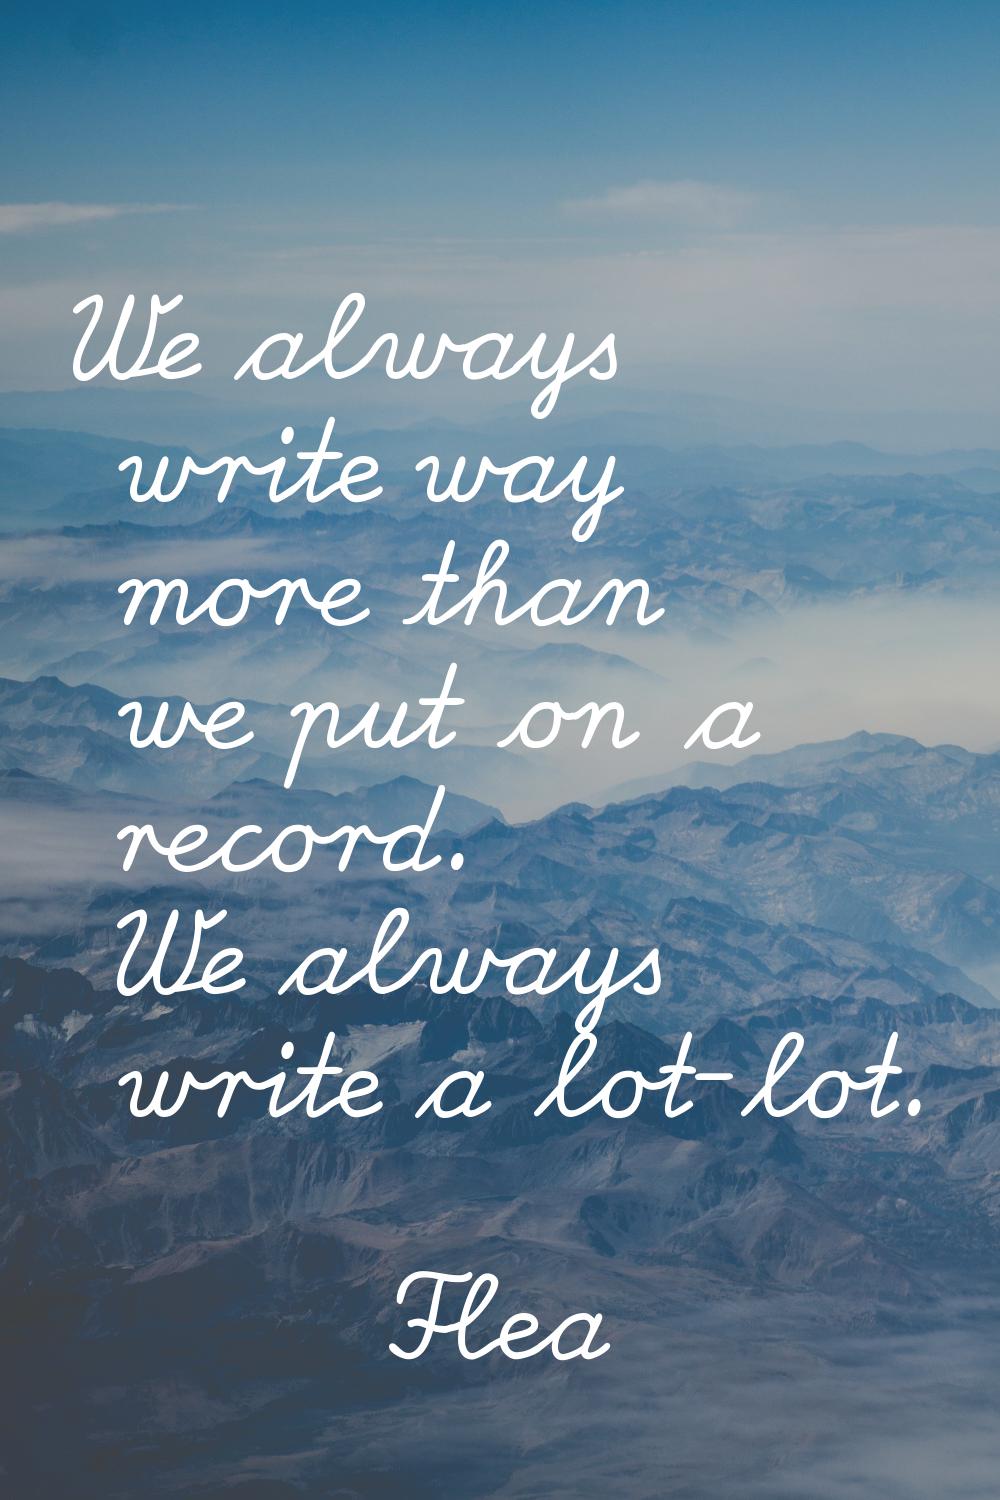 We always write way more than we put on a record. We always write a lot-lot.